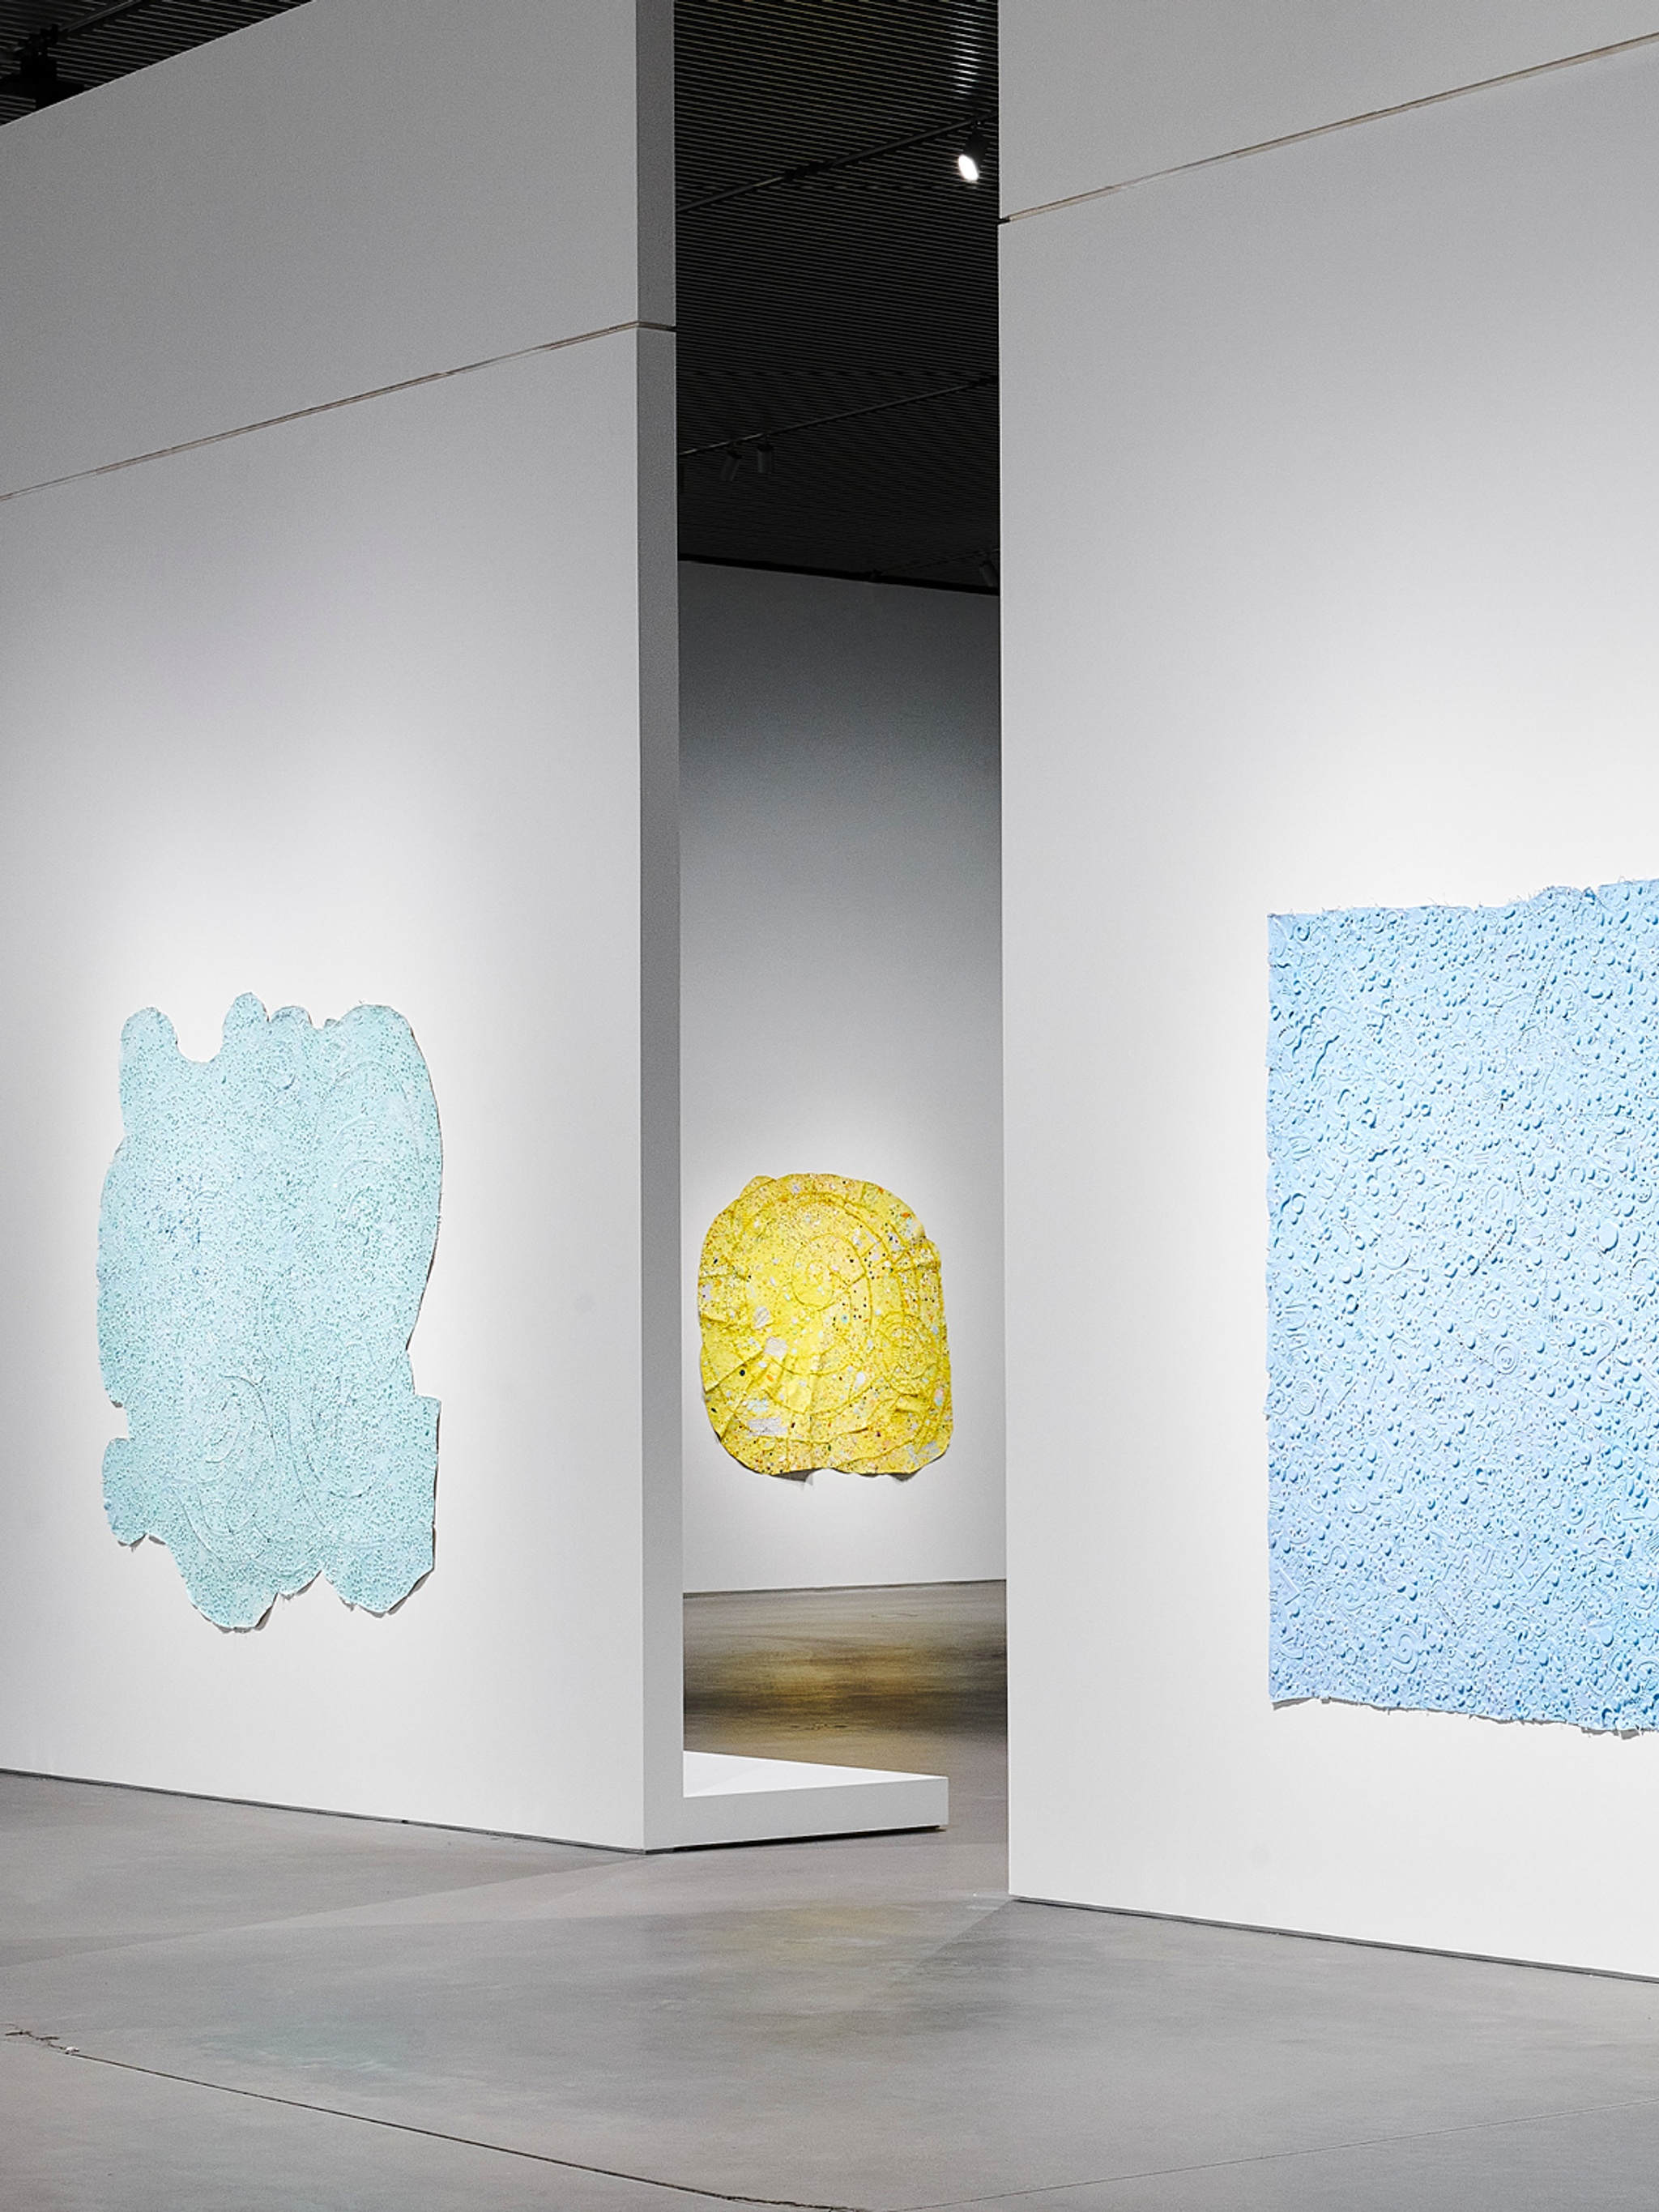 Abstract paintings in the exhibition "Howardena Pindell: Rope/Fire/Water." In the foreground are two blue paintings, with a curvilinear yellow painting visible through a gap in the wall in the background.